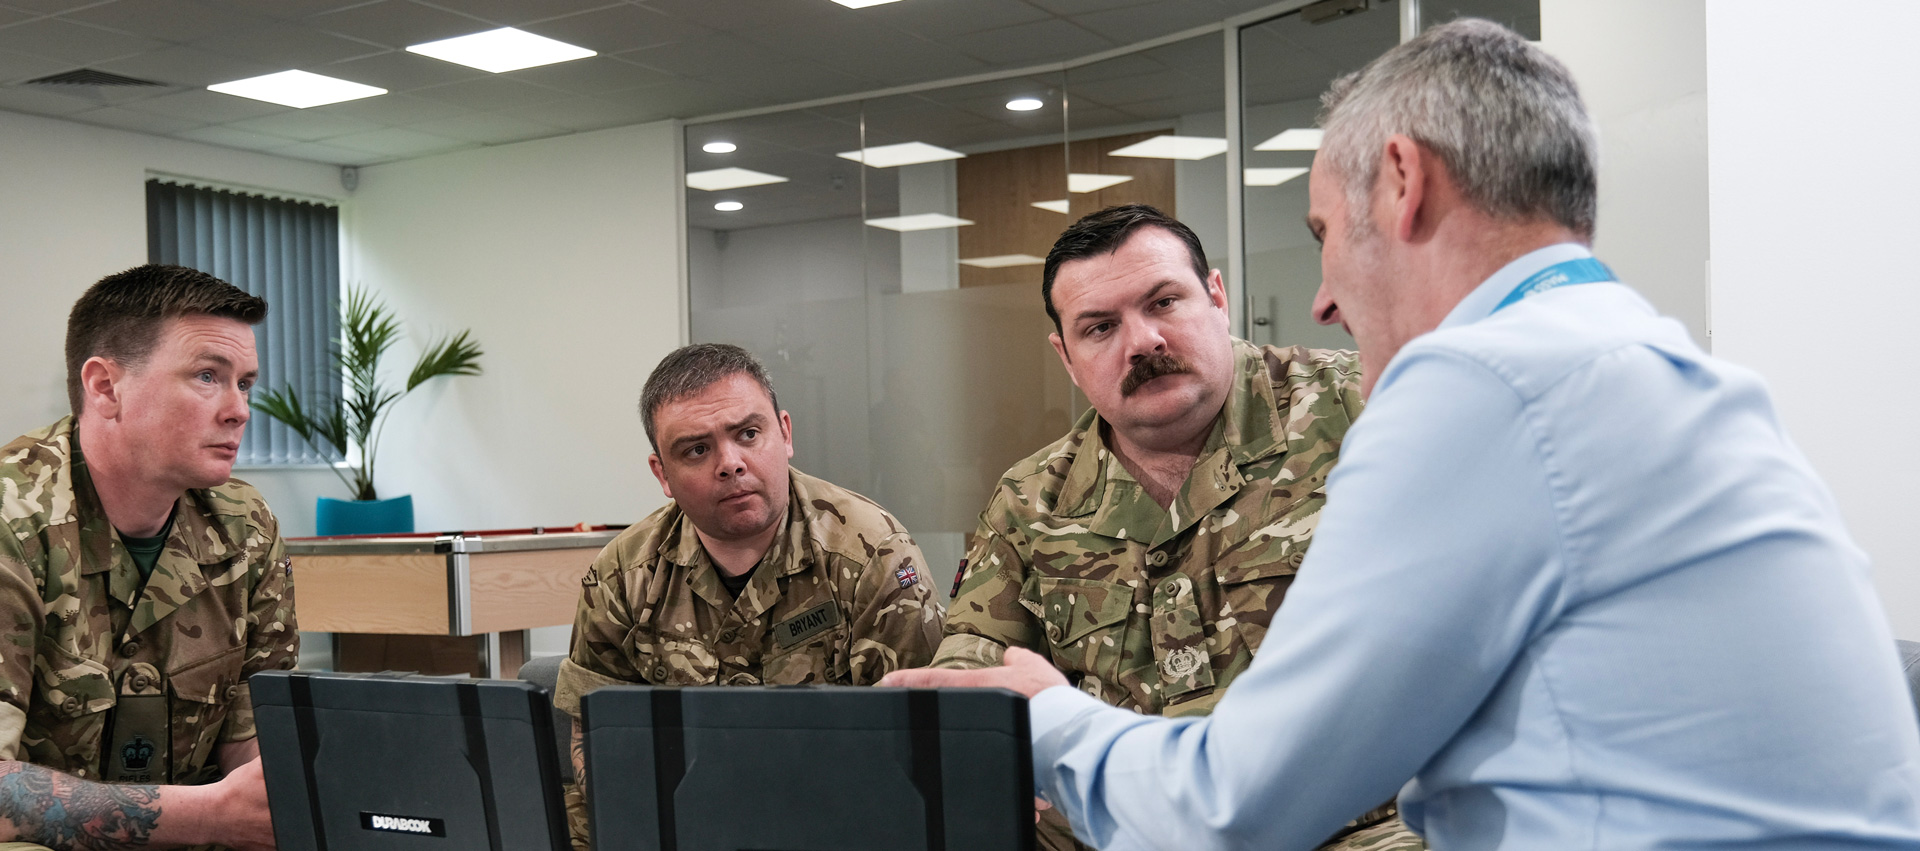 computer programme demonstration to UK military personel